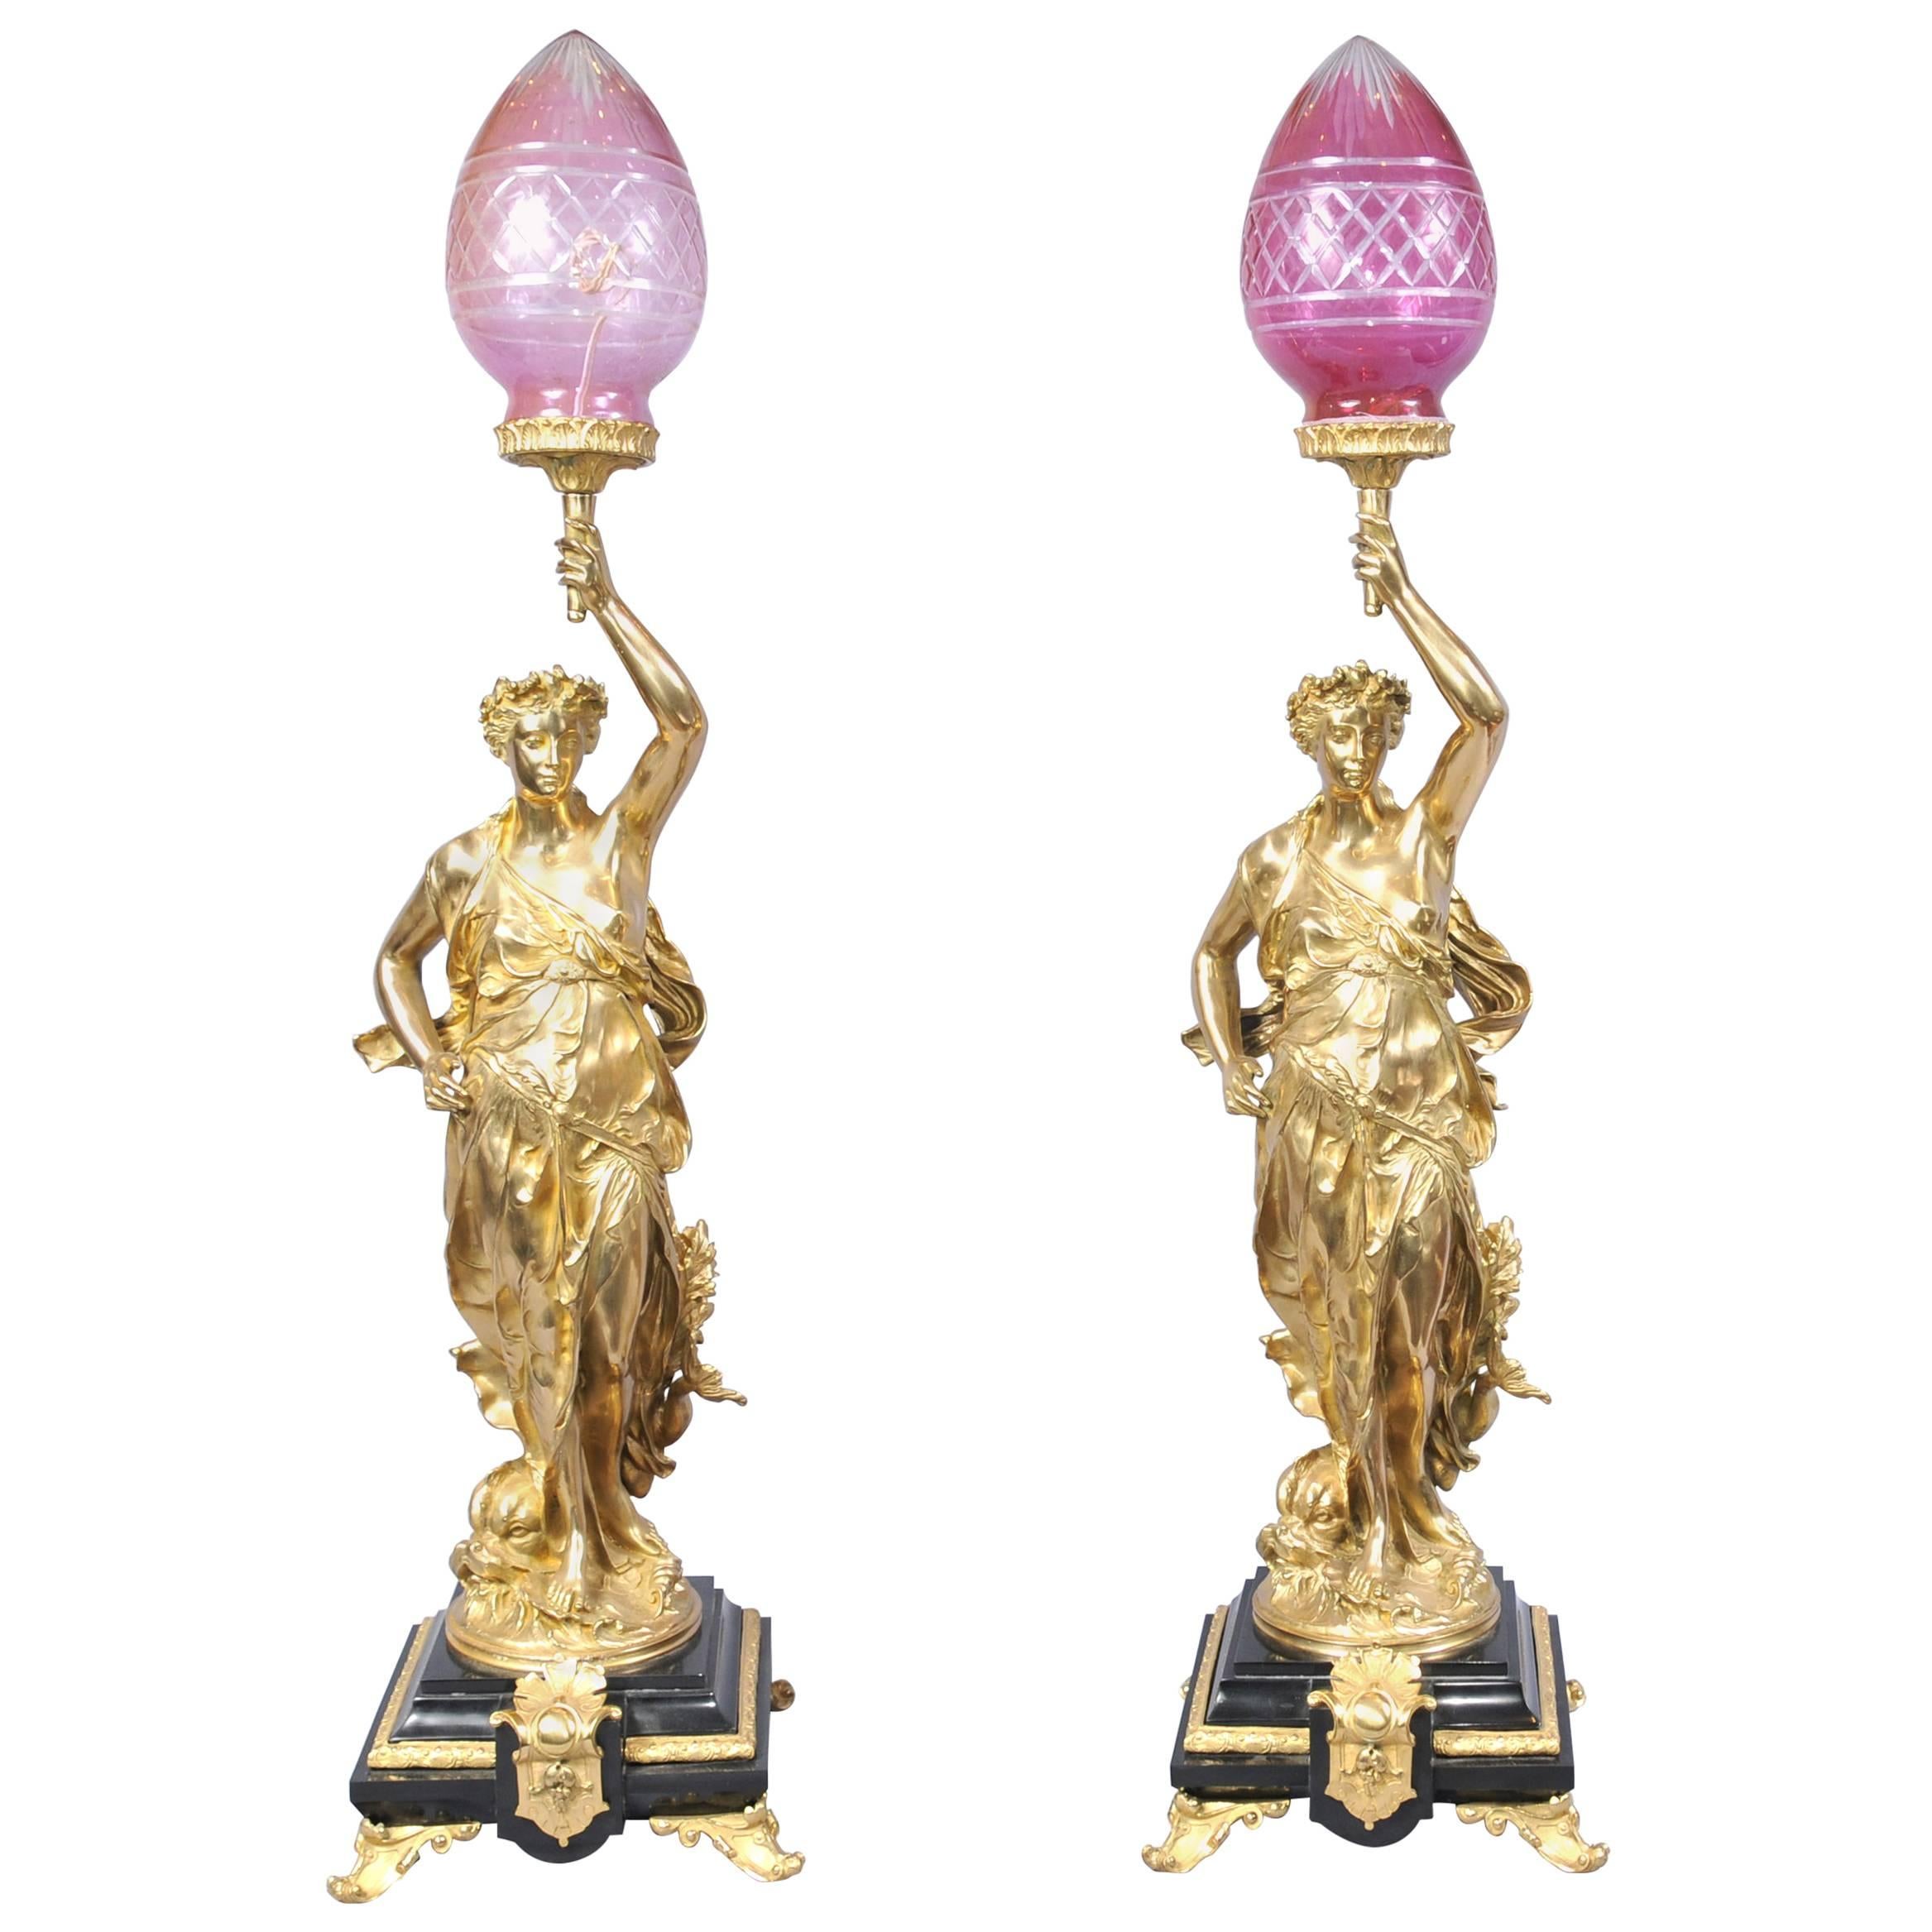 Pair of French Ormolu Gregoire Classic Figurine Lamps Lights Torcheres